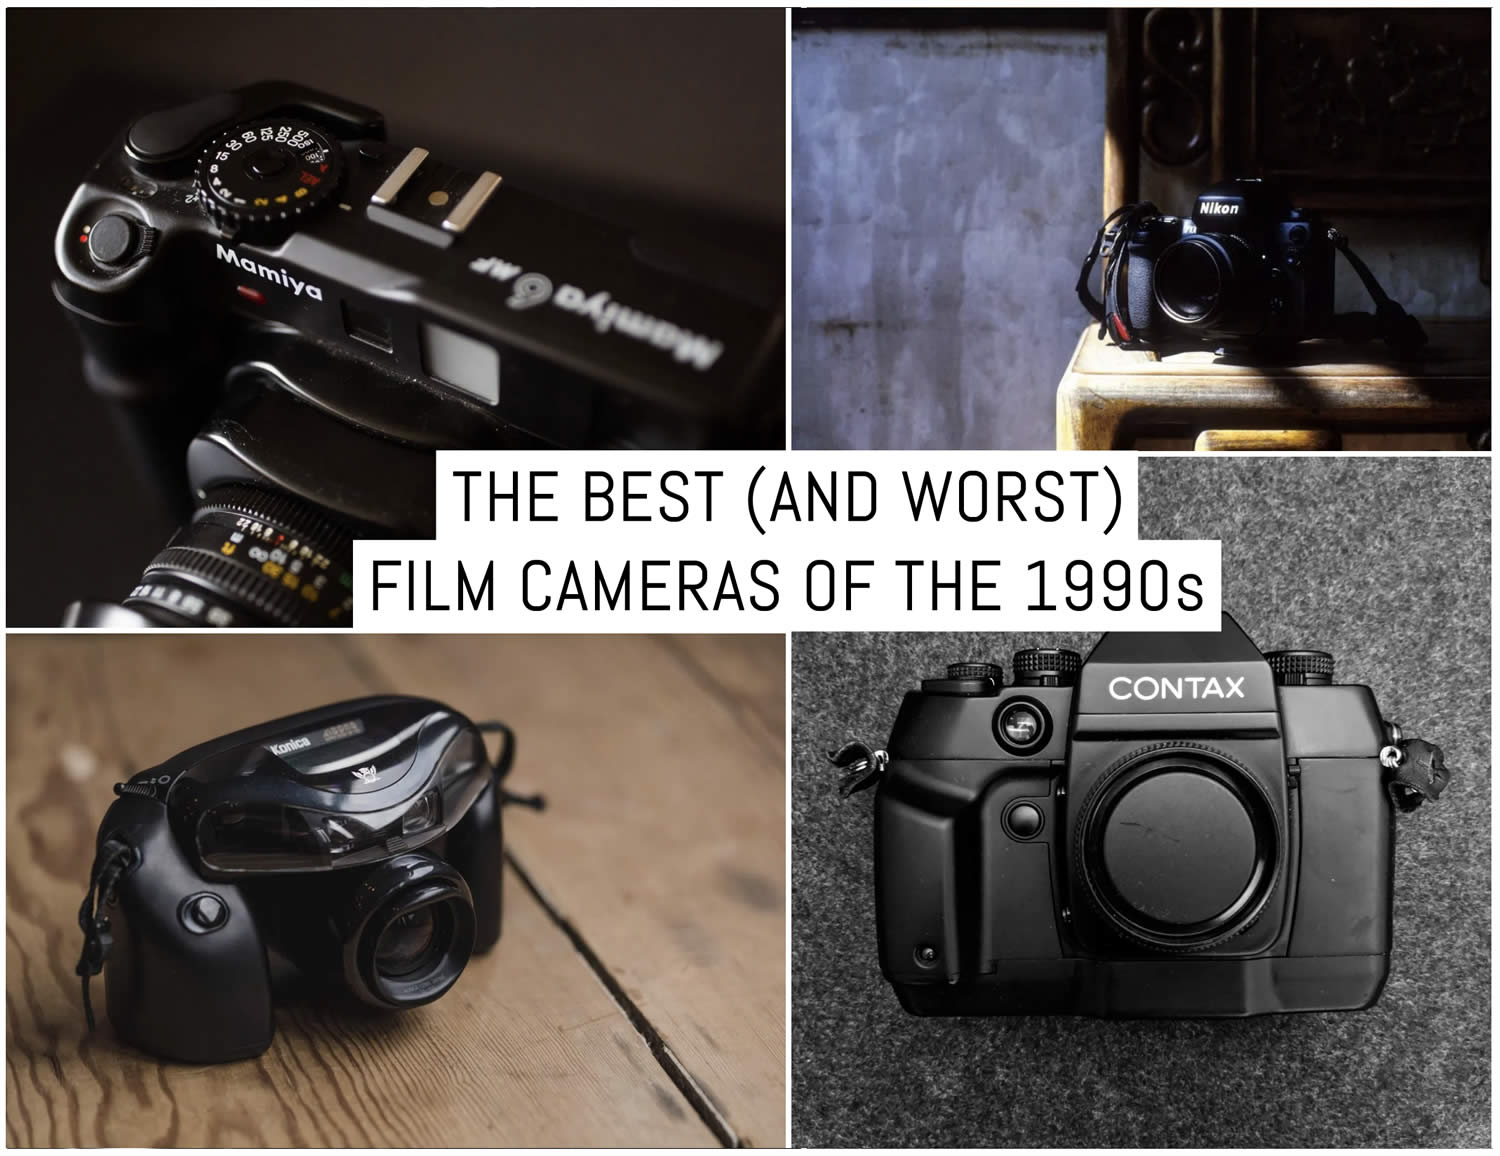 (and worst) cameras of the 1990s -